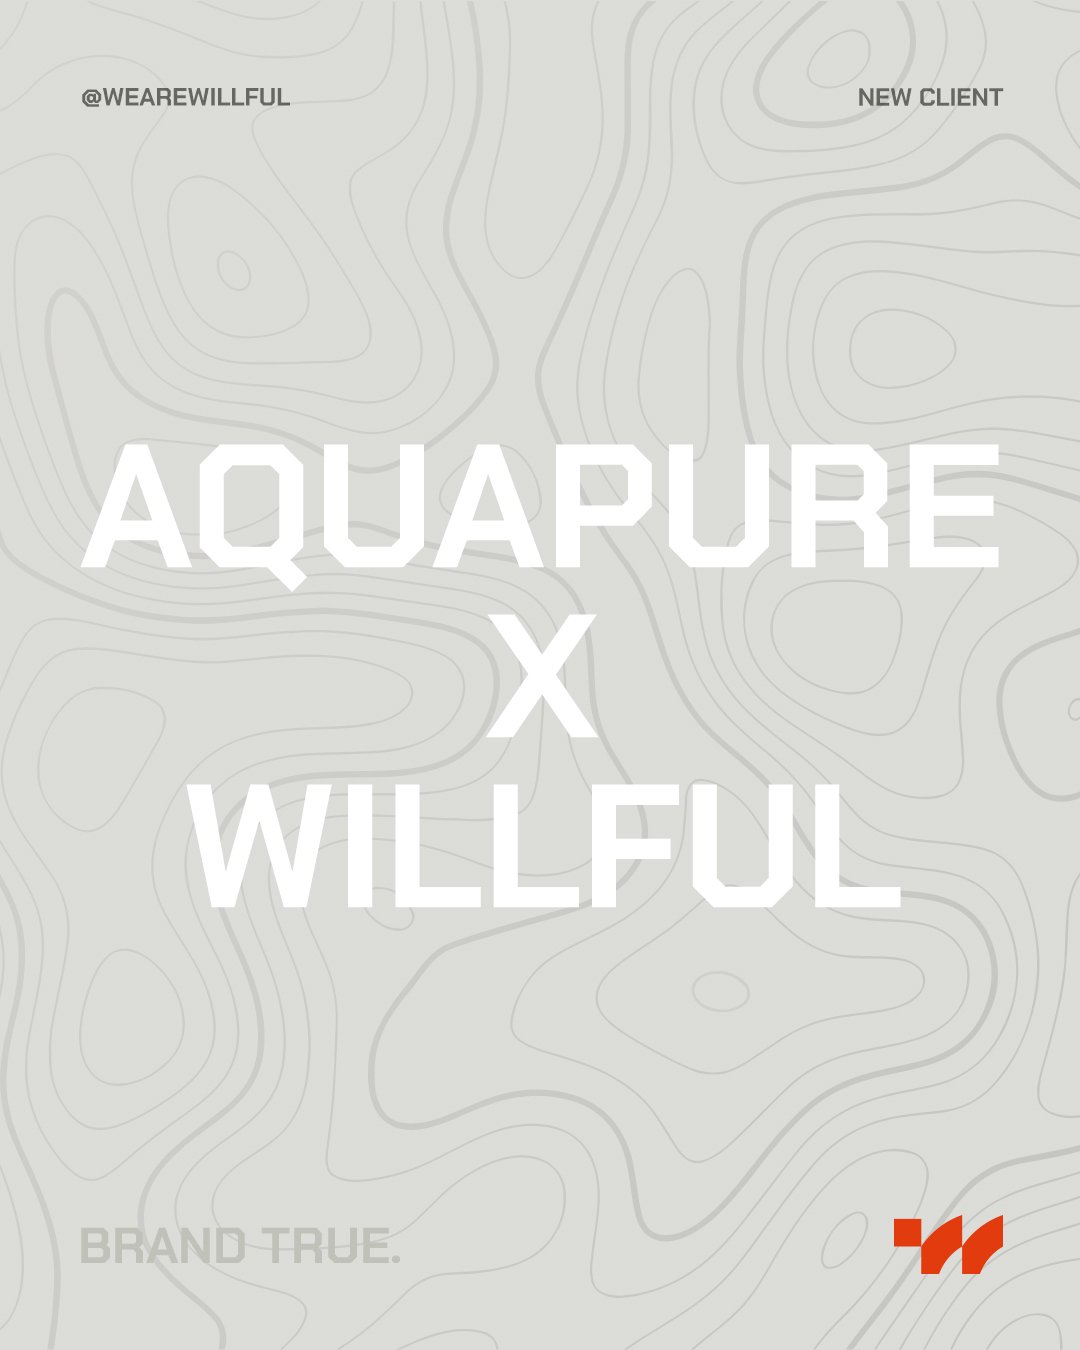 NEW CLIENT: We're excited to join forces with AquaPure to help strengthen its visual brand and product website.
@aquapureenterprises 

#newclient #brandtrue #madebywillful #branding #branddesign #brandagency